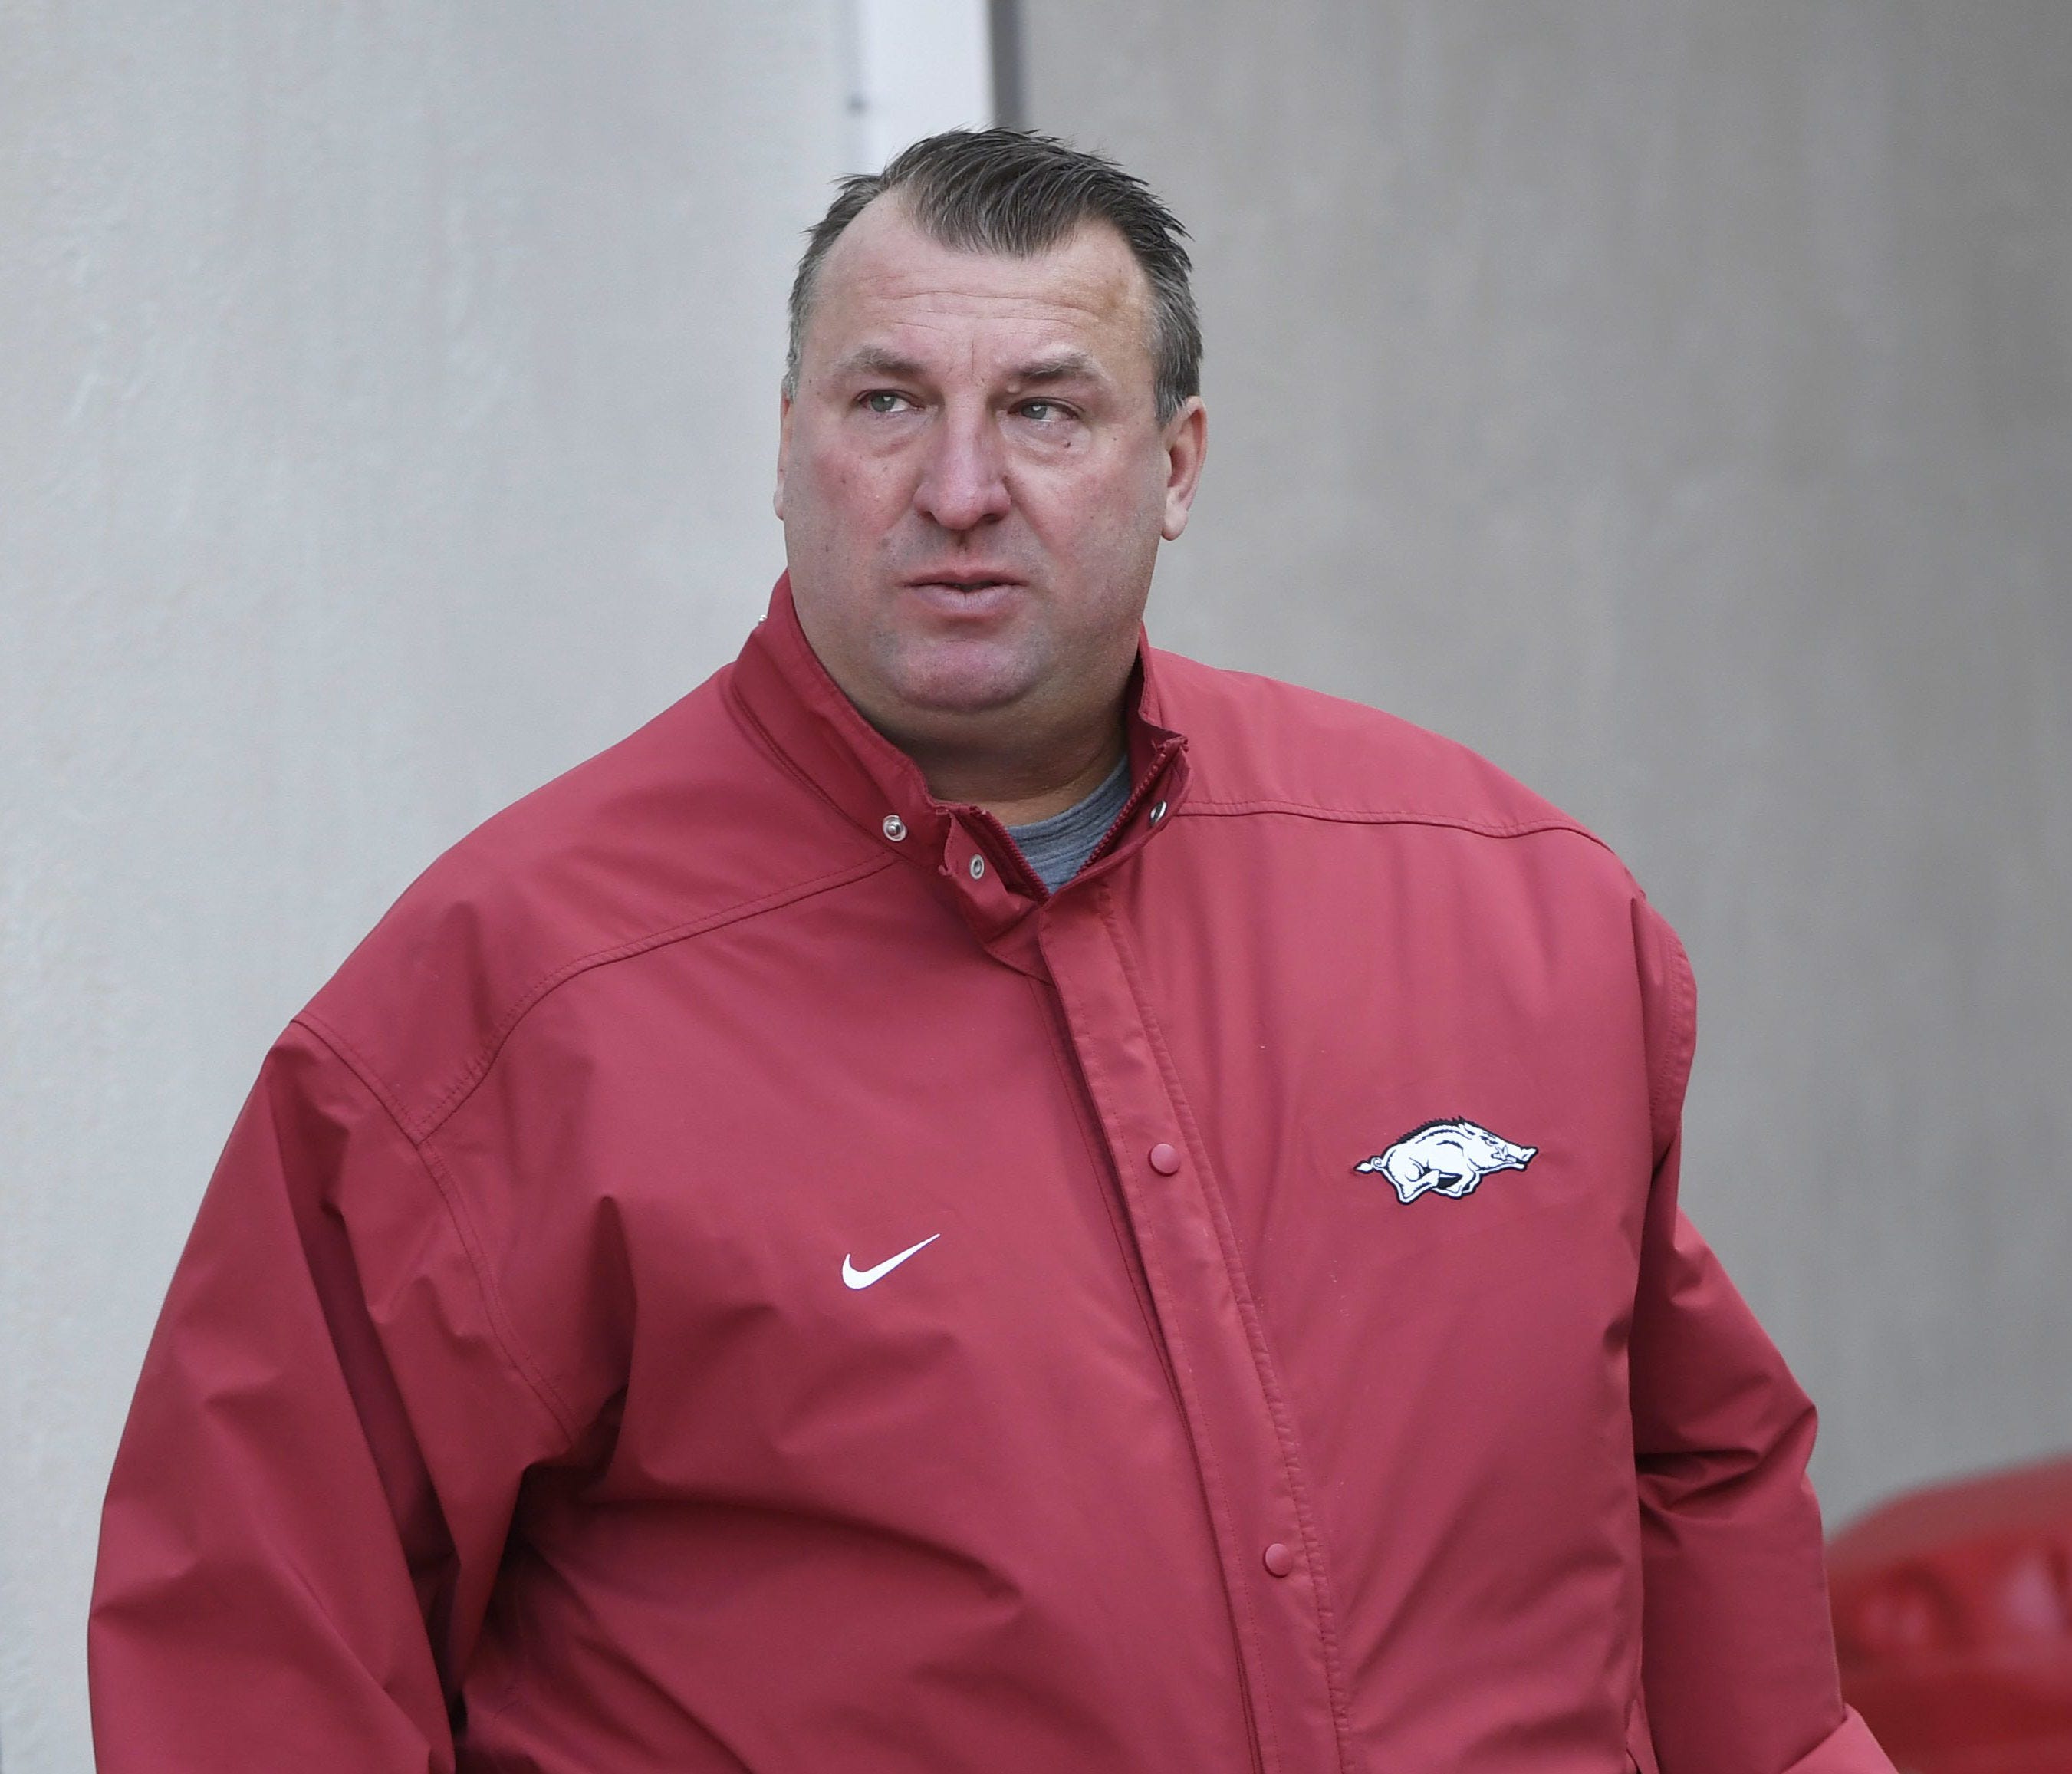 Arkansas coach Bret Bielema gets choked up as the senior players are introduced before the start of an NCAA college football game Friday, Nov. 24, 2017 in Fayetteville, Ark. Bielema was fired following the Razorbacks 48-45 loss to Missouri. (AP Photo